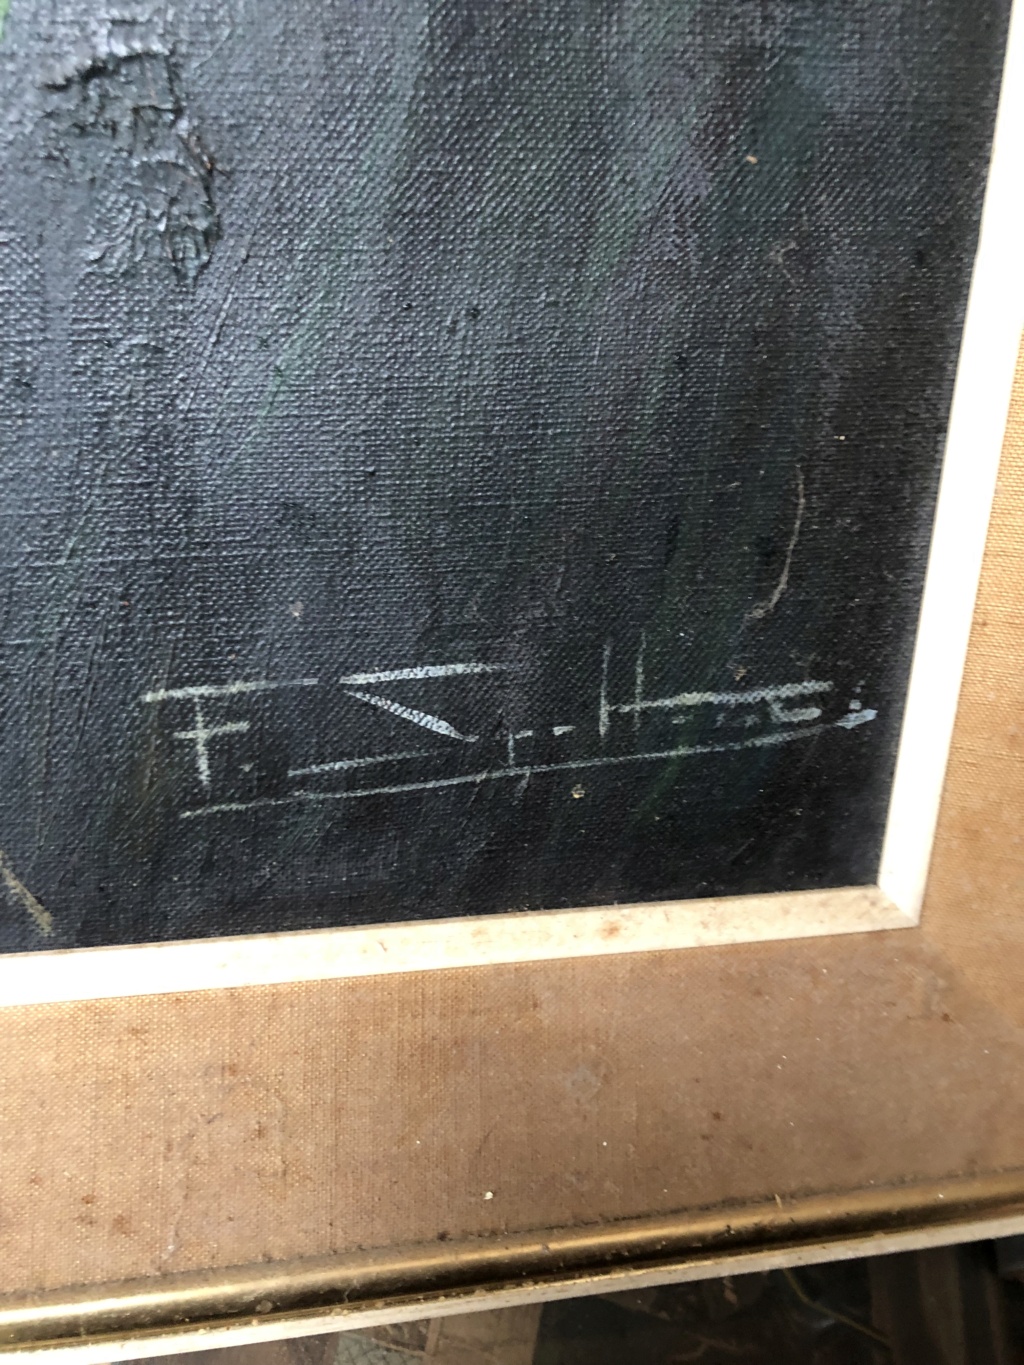 Help Identify Signature On Italian High Relief On Canvas 01012